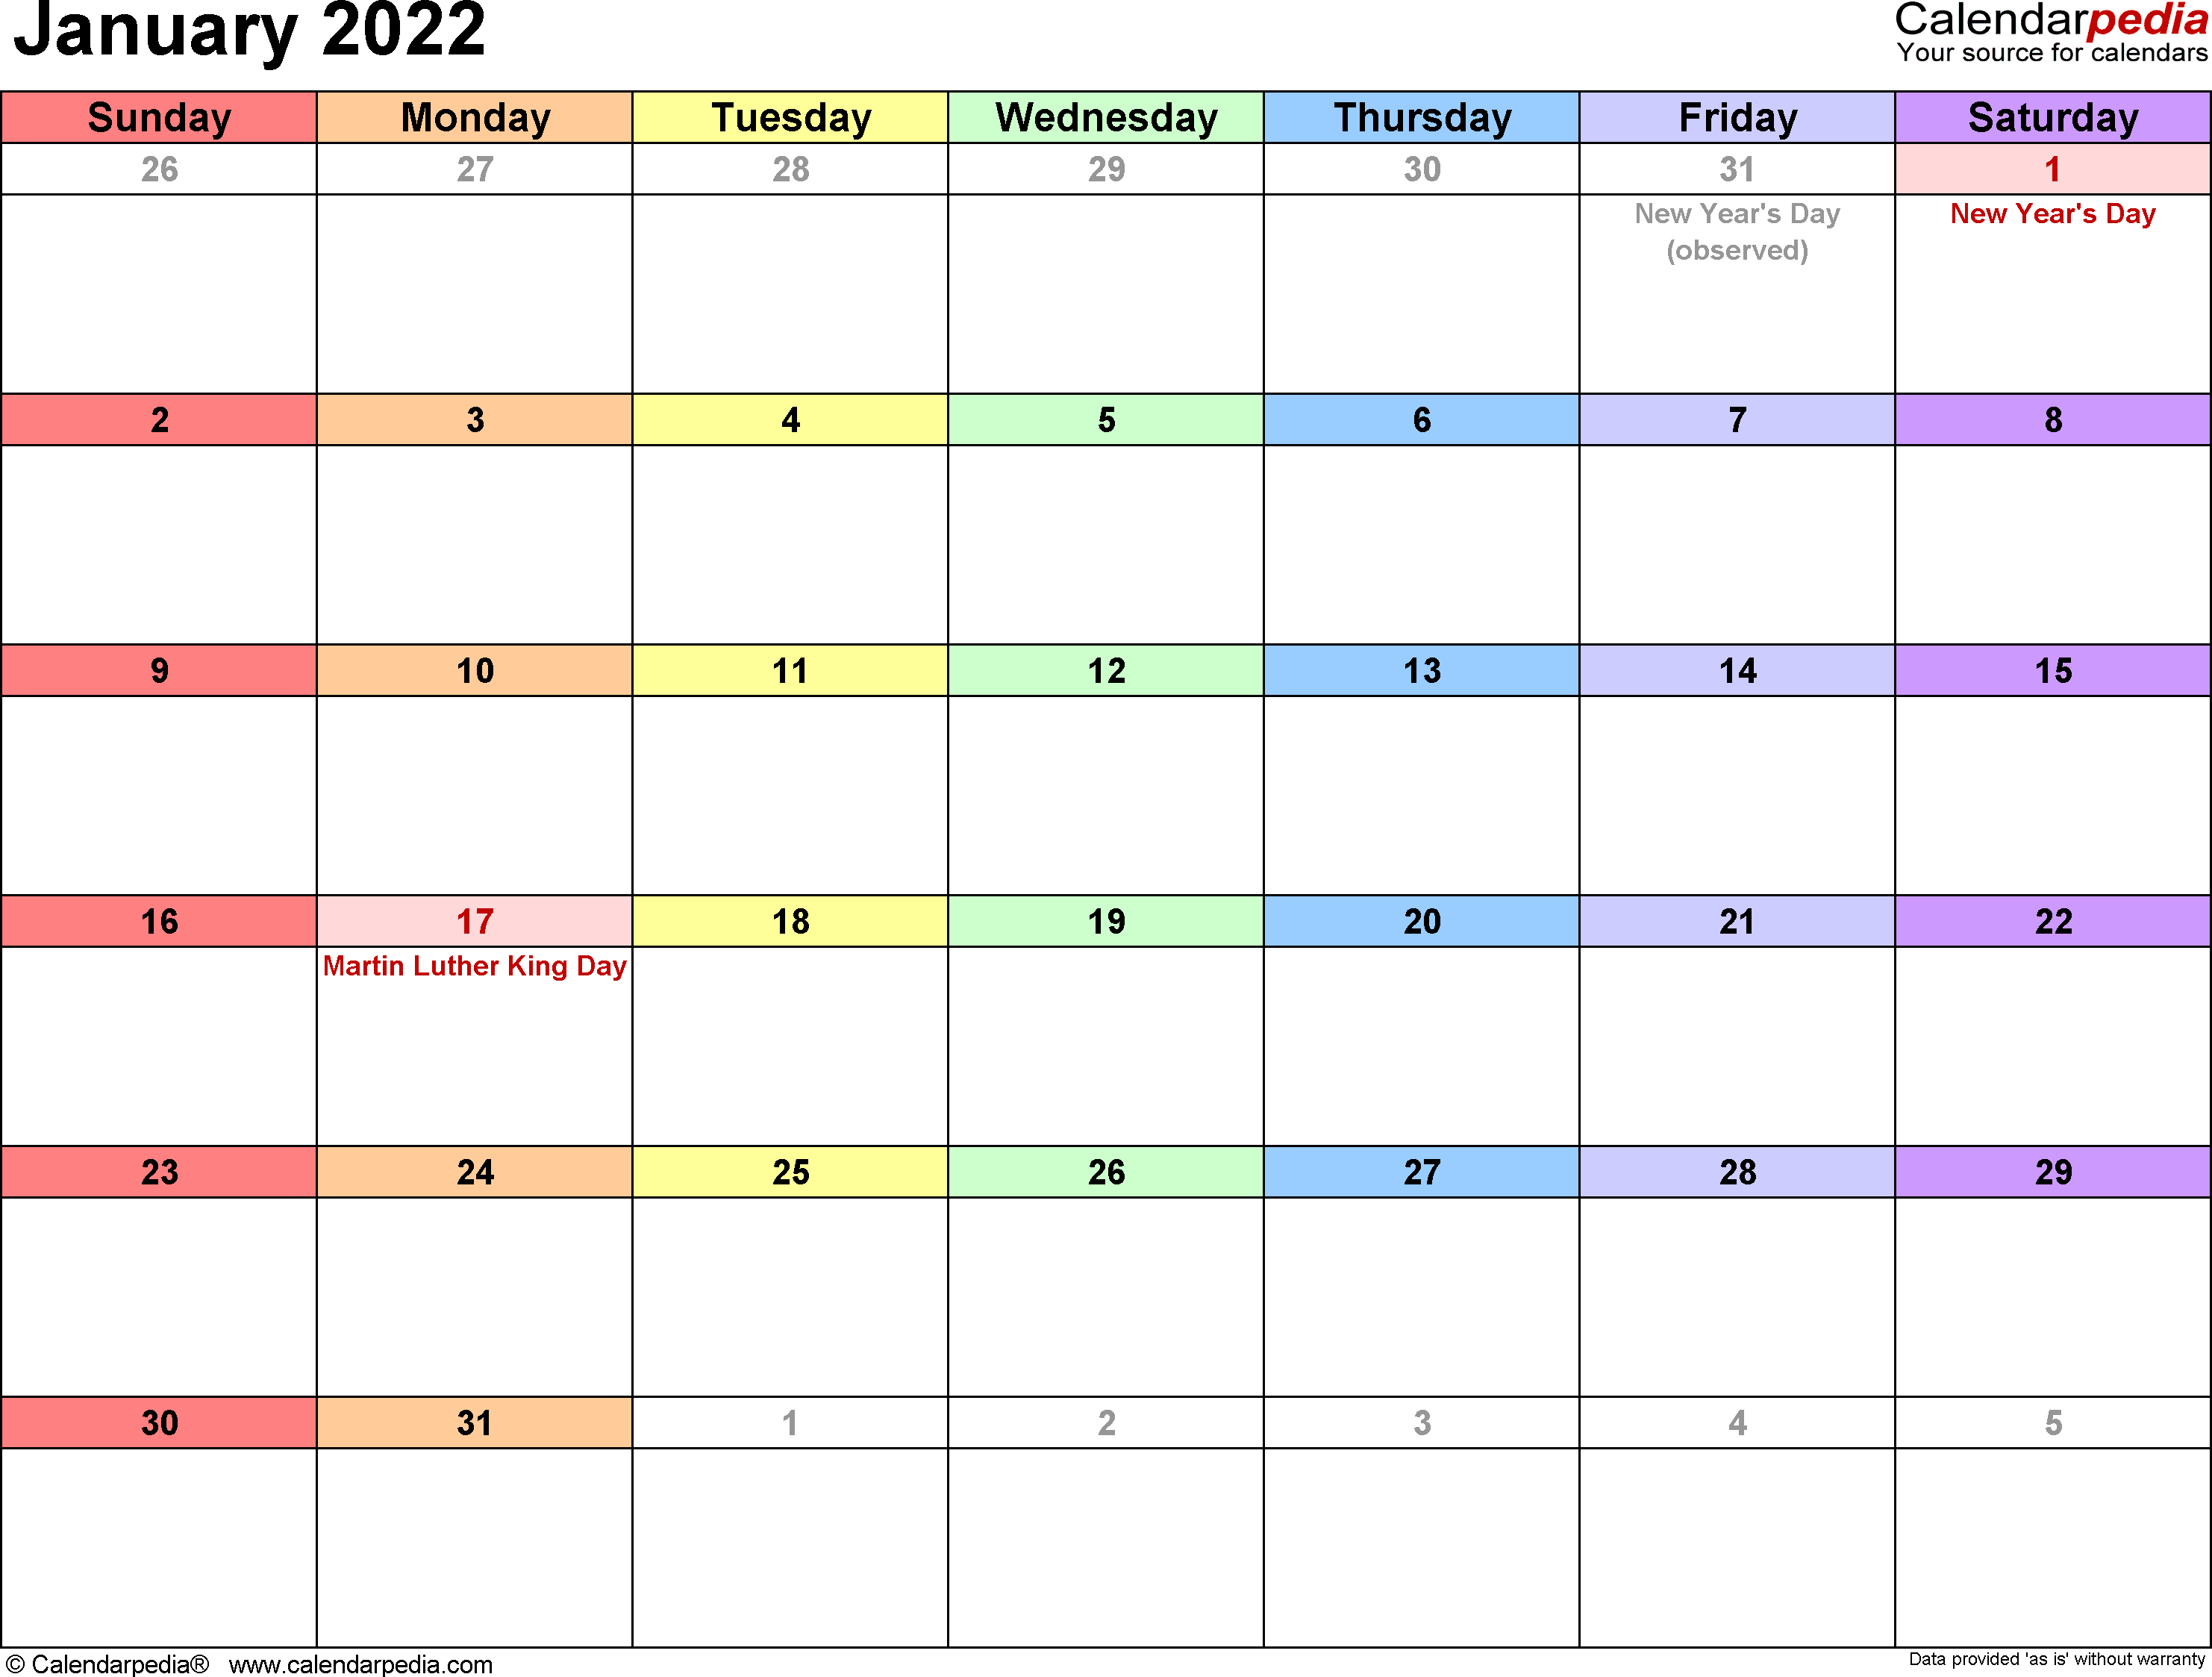 January 2022 Calendars for Word, Excel & PDF